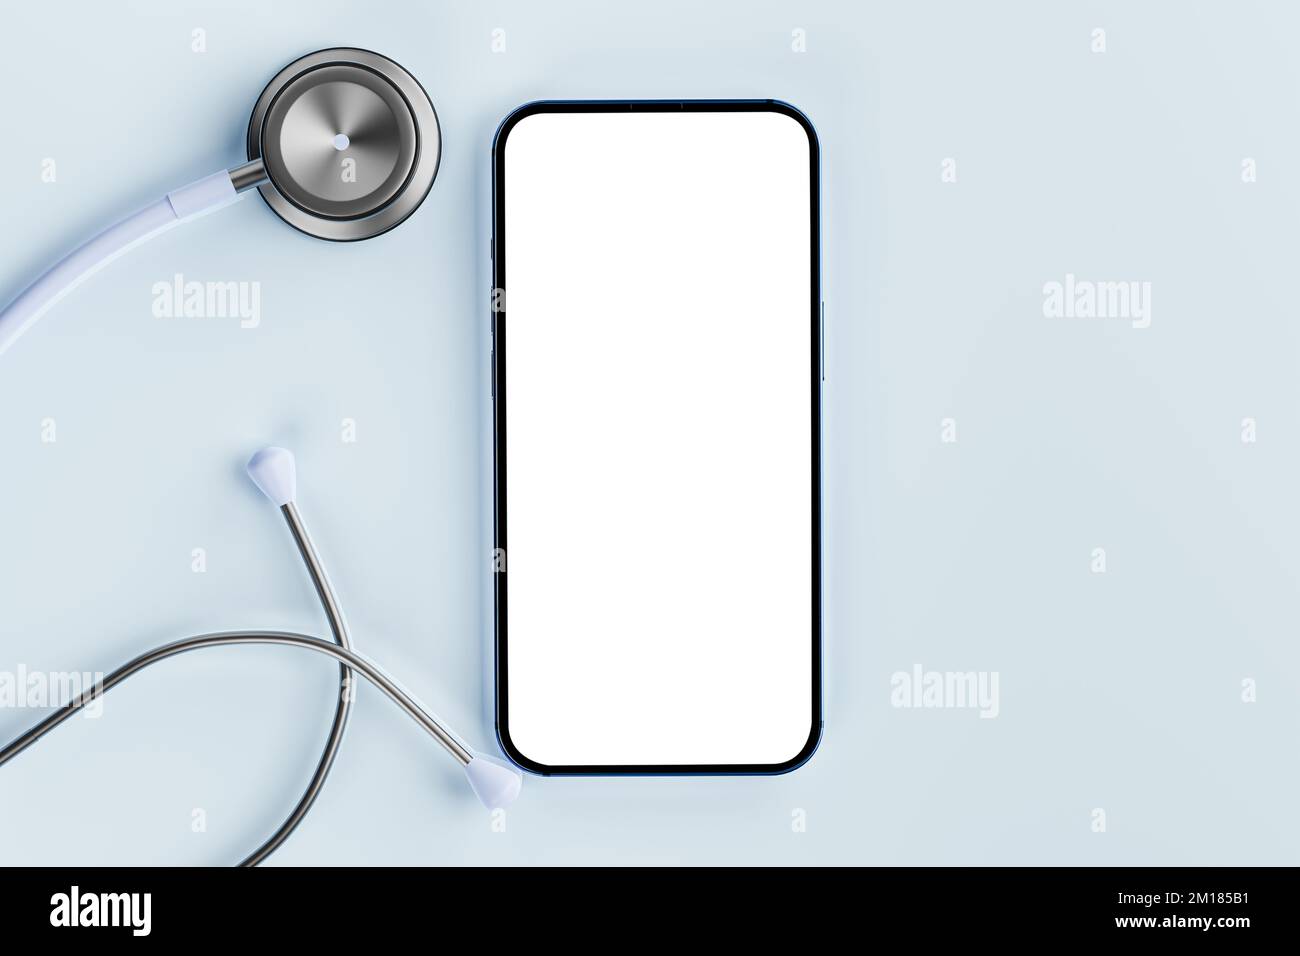 online doctor. app health phone mockup. get an online consultation from doctor by mobile phone. stethoscope and cell phone on white background. copy s Stock Photo